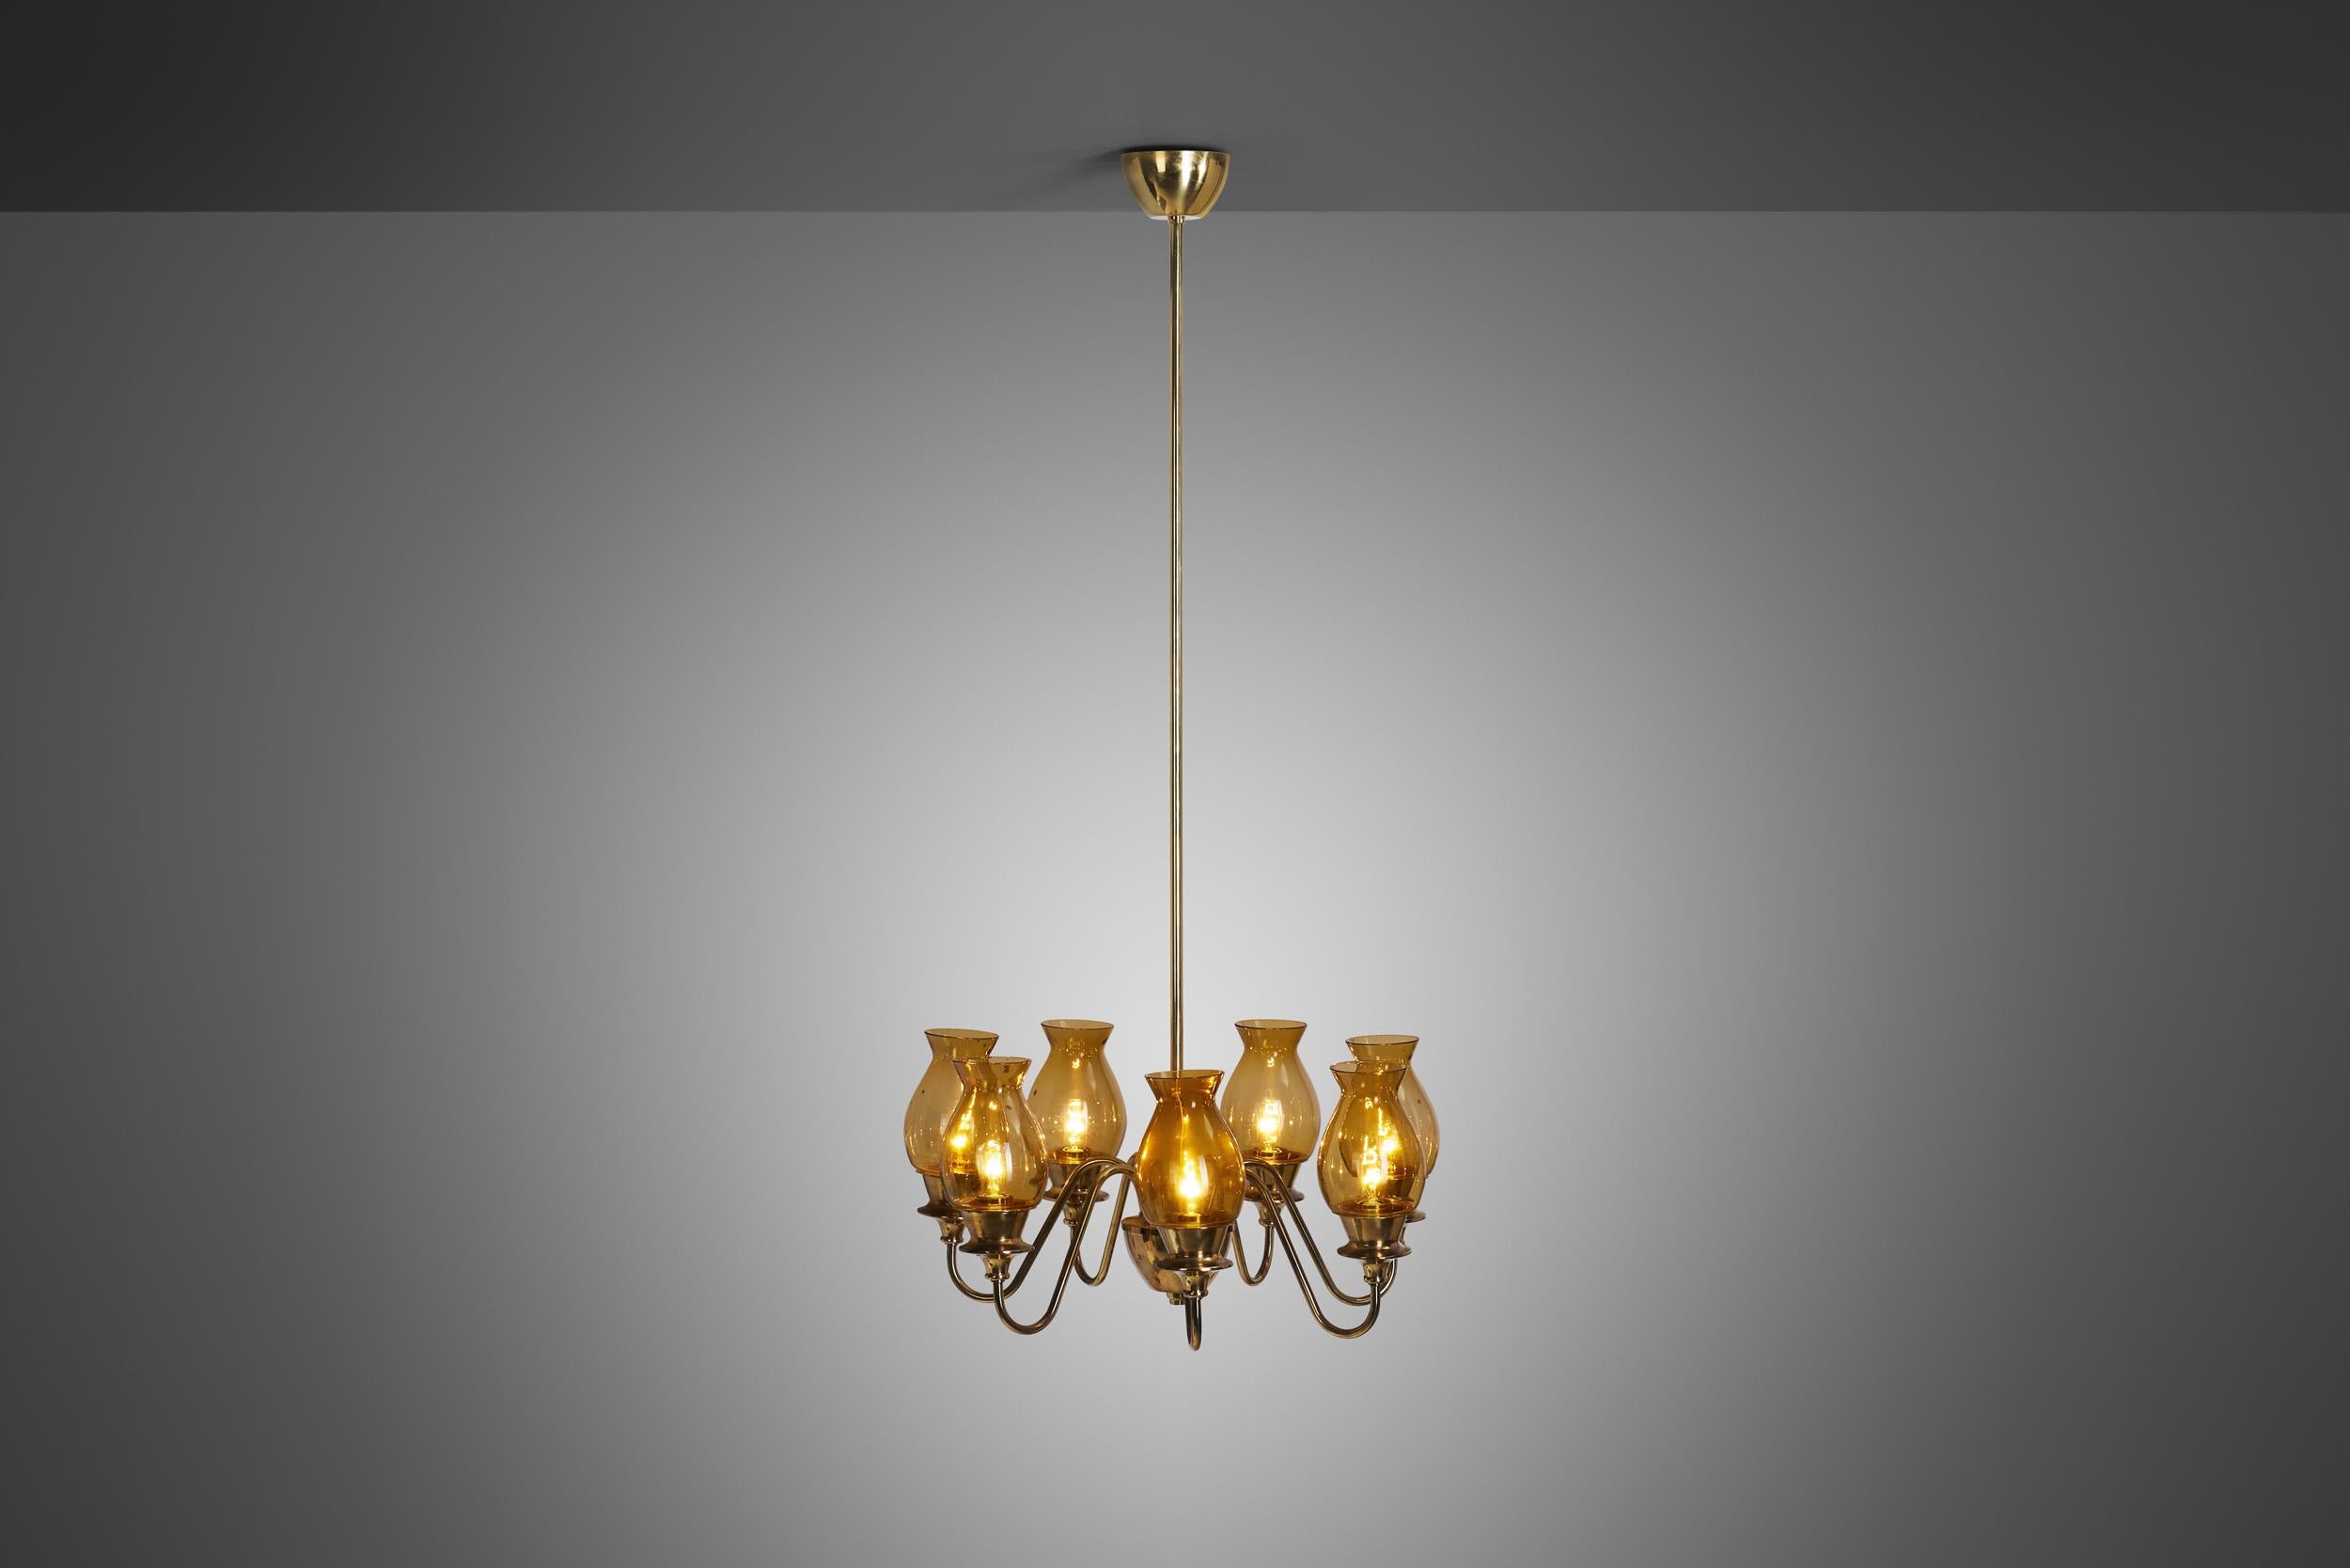 The “T-837” chandelier series belong to the rarer models of Hans-Agne Jakobsson, and they possess many similarities to the Swedish designer’s most famous and popular creations.

This marvellous, brass seven-light chandelier was created in what we